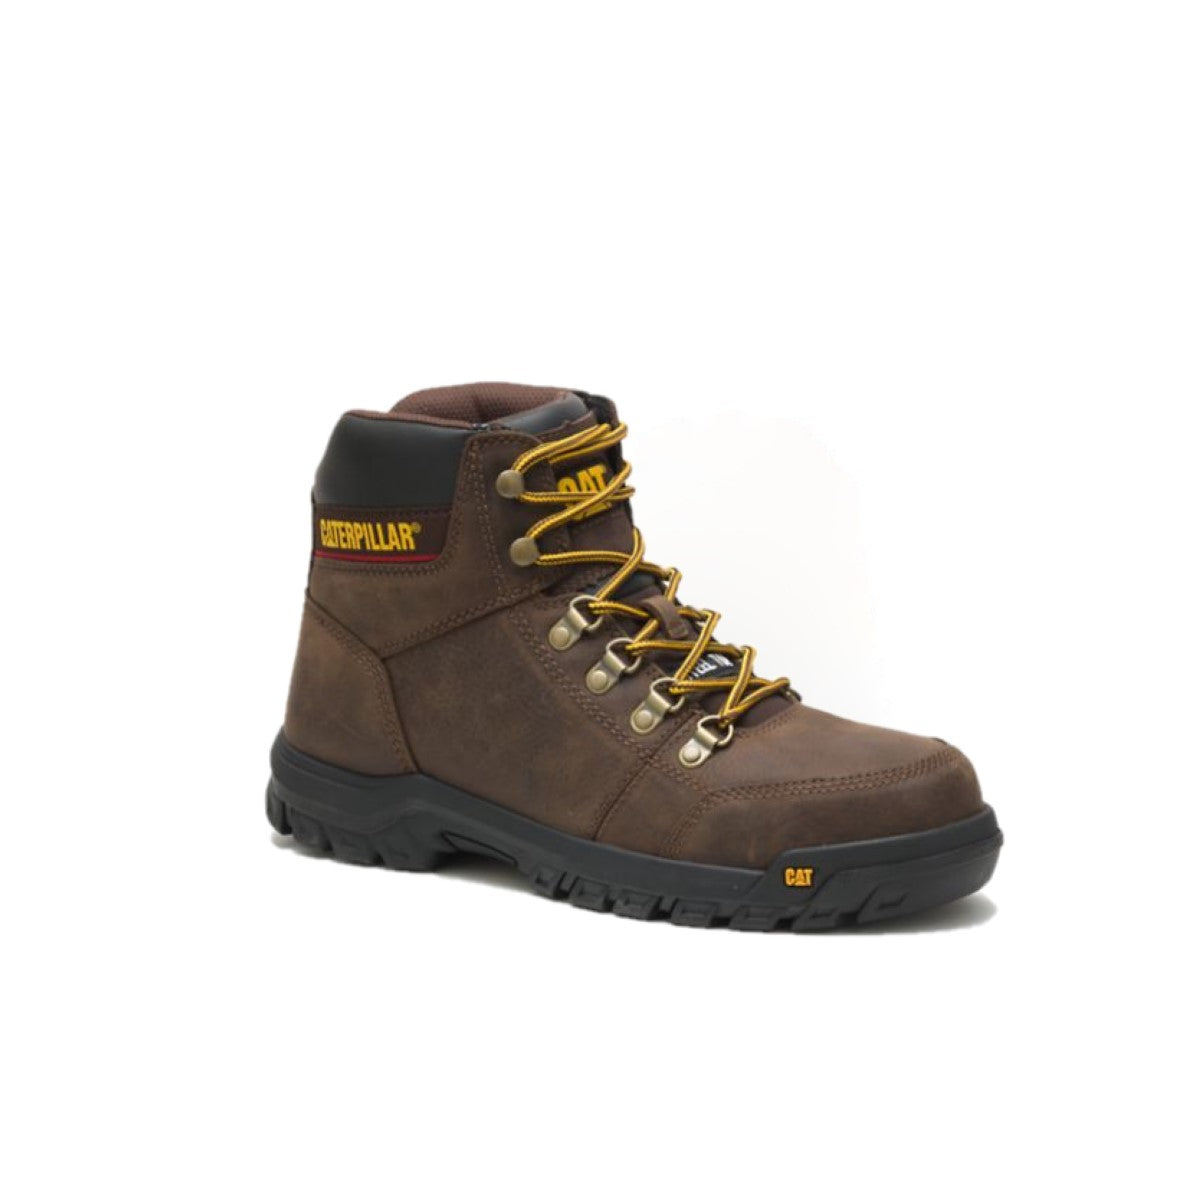 CATERPILLAR P90803-W OUTLINE ST MN'S (Wide) Seal Brown Leather Work Boots